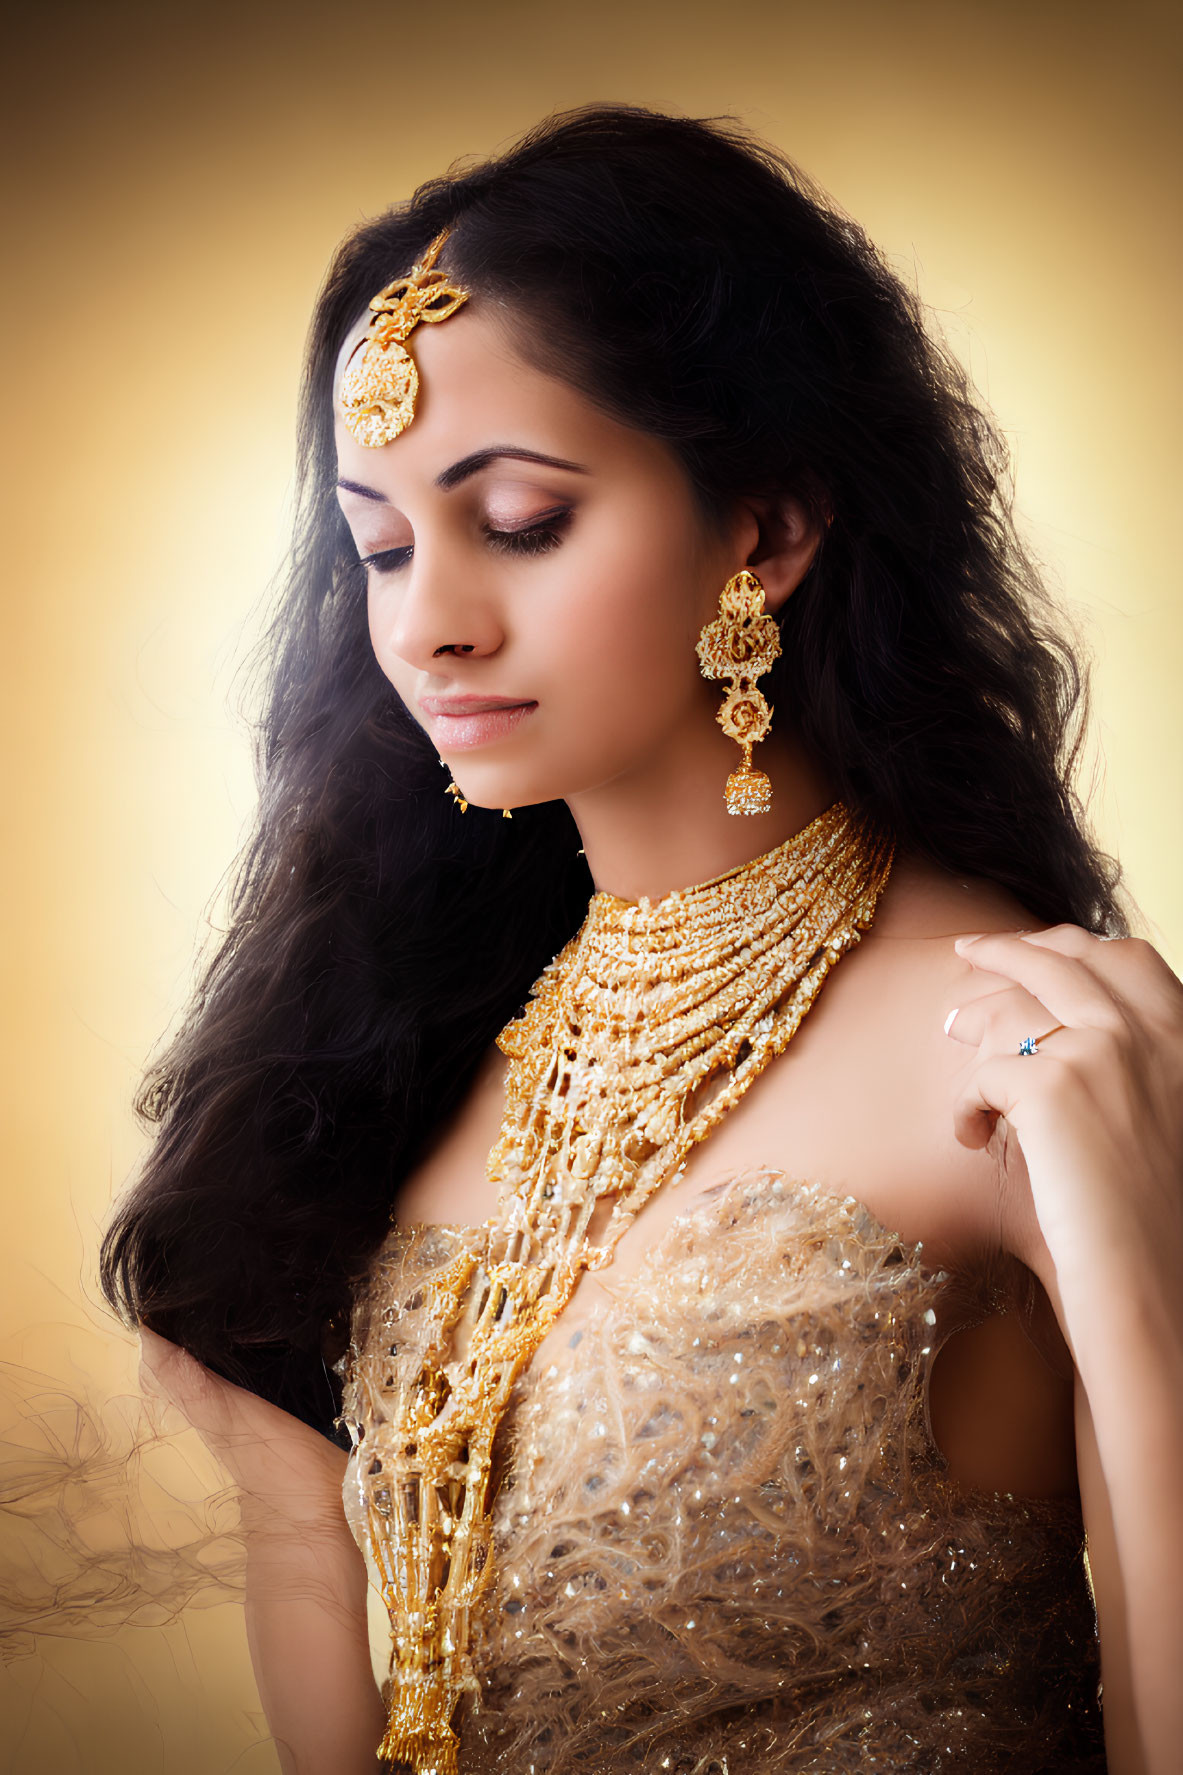 Elaborate gold jewelry on woman against warm backdrop